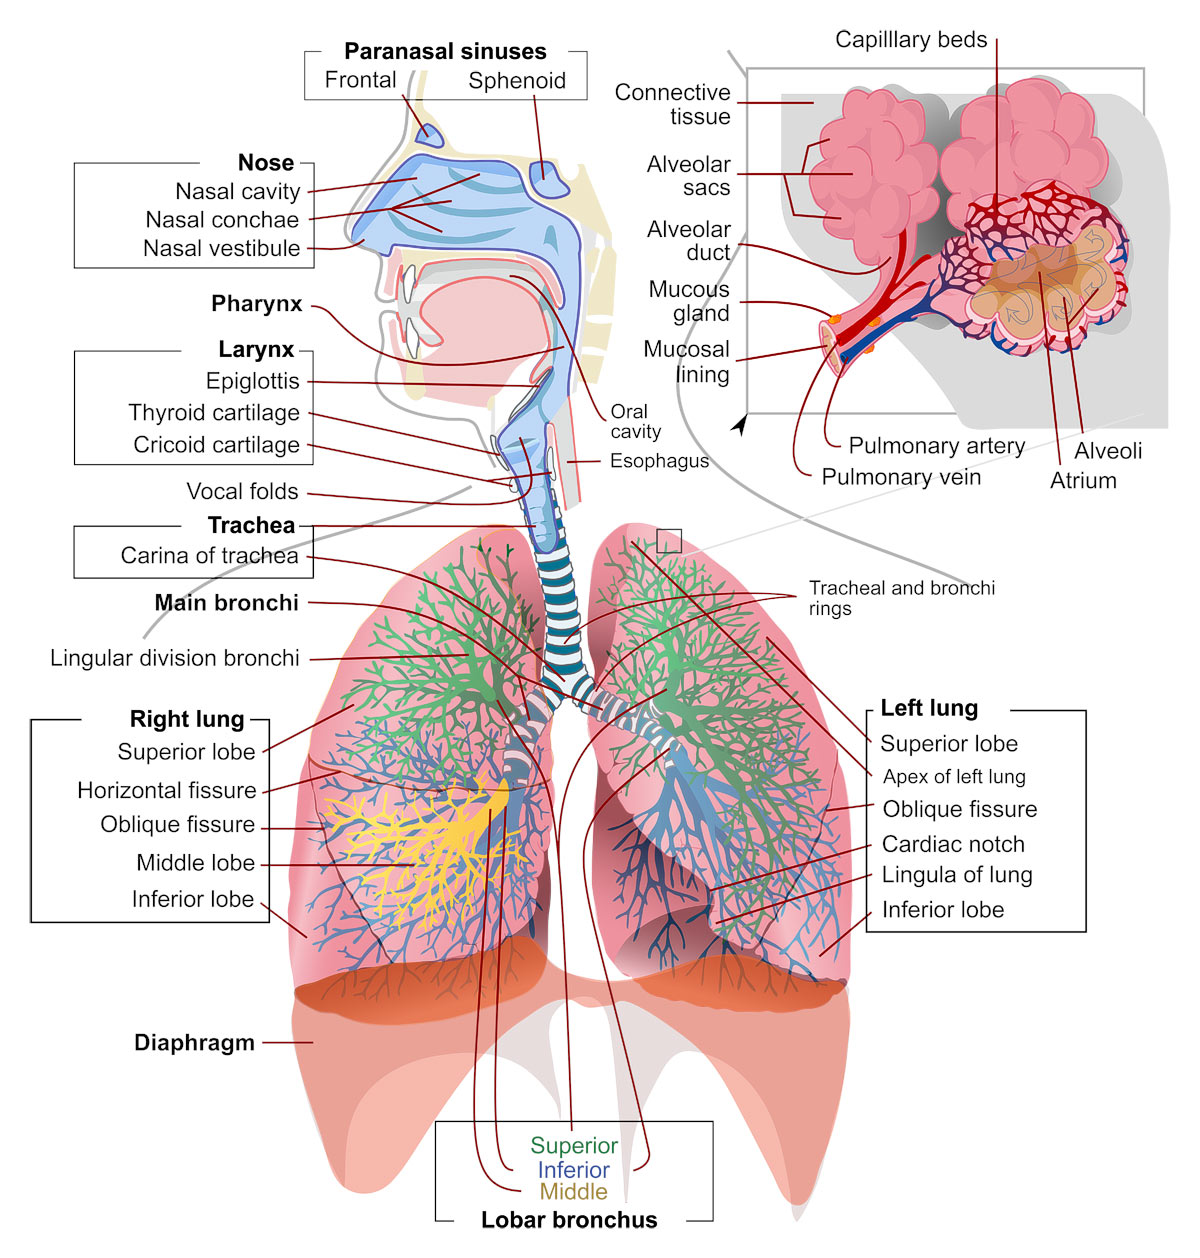 The respiratory system consists of the airways, the lungs, and the respiratory muscles that mediate the movement of air into and out of the body.